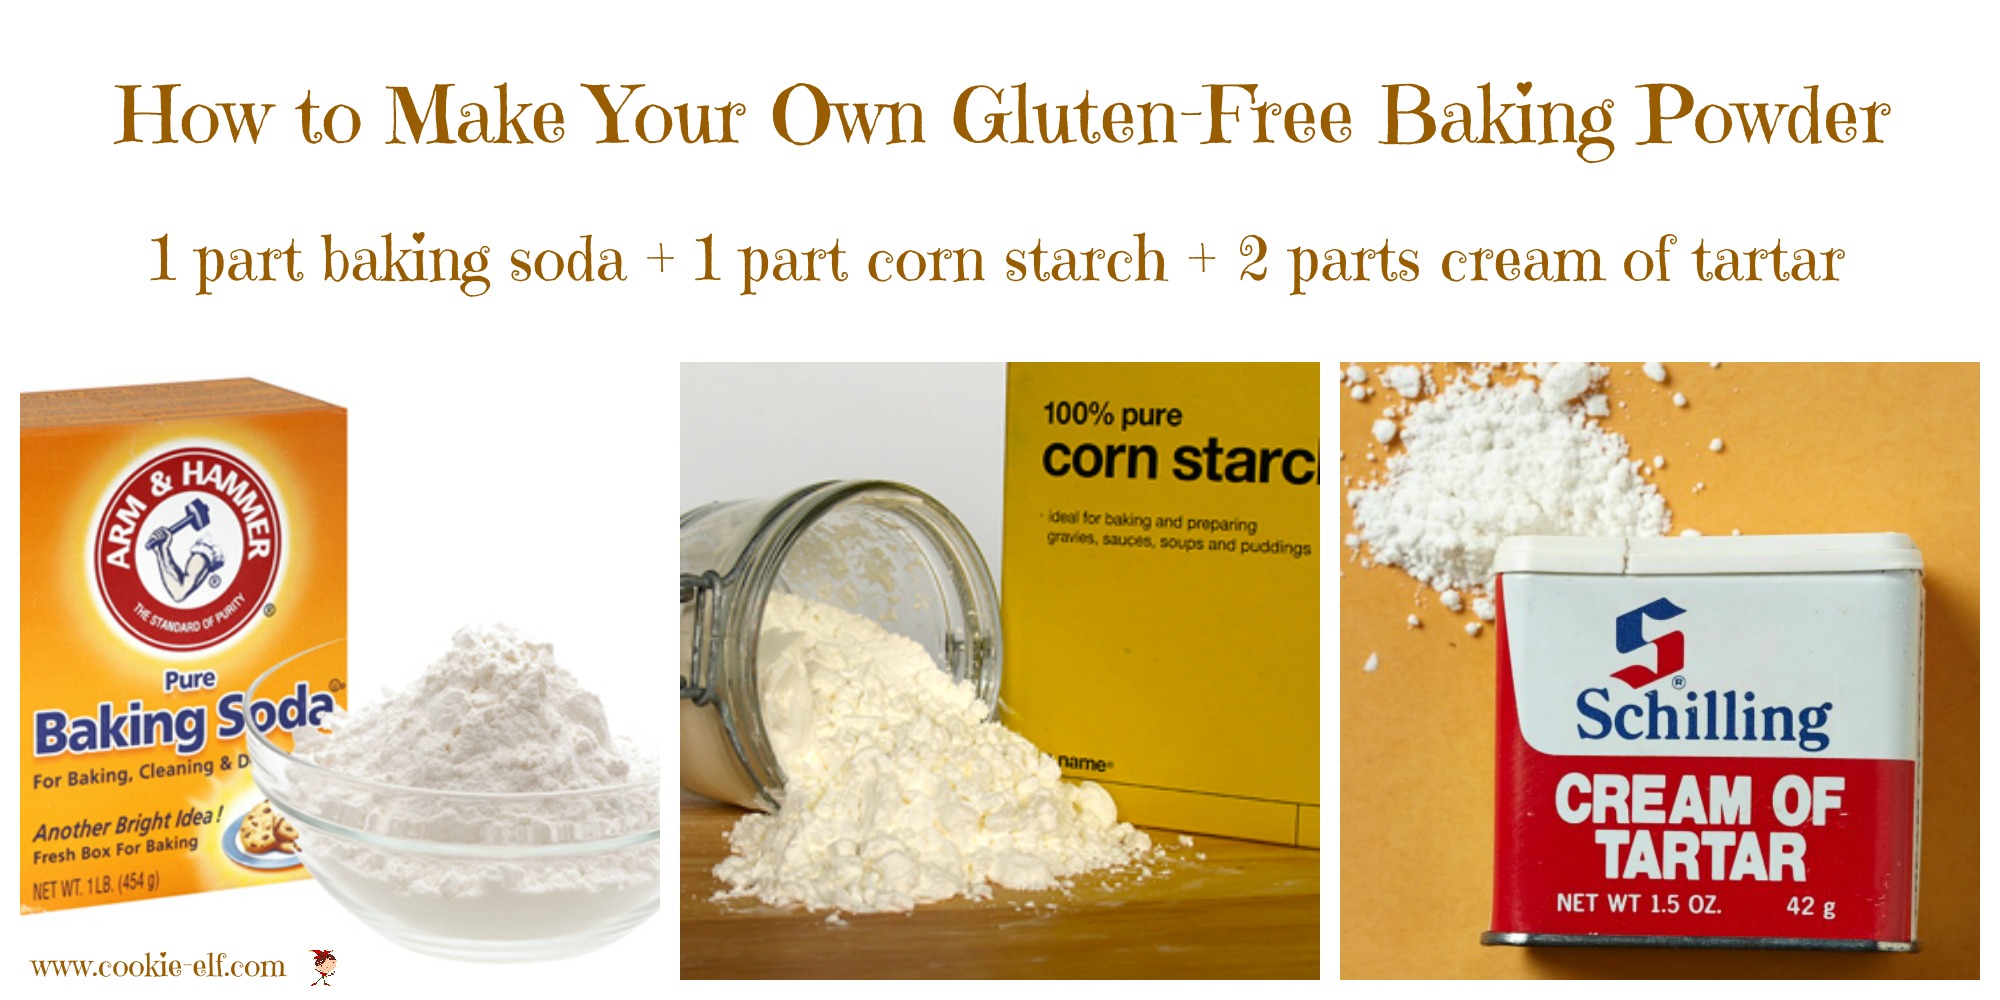 How to make your own gluten-free baking powder with The Cookie Elf